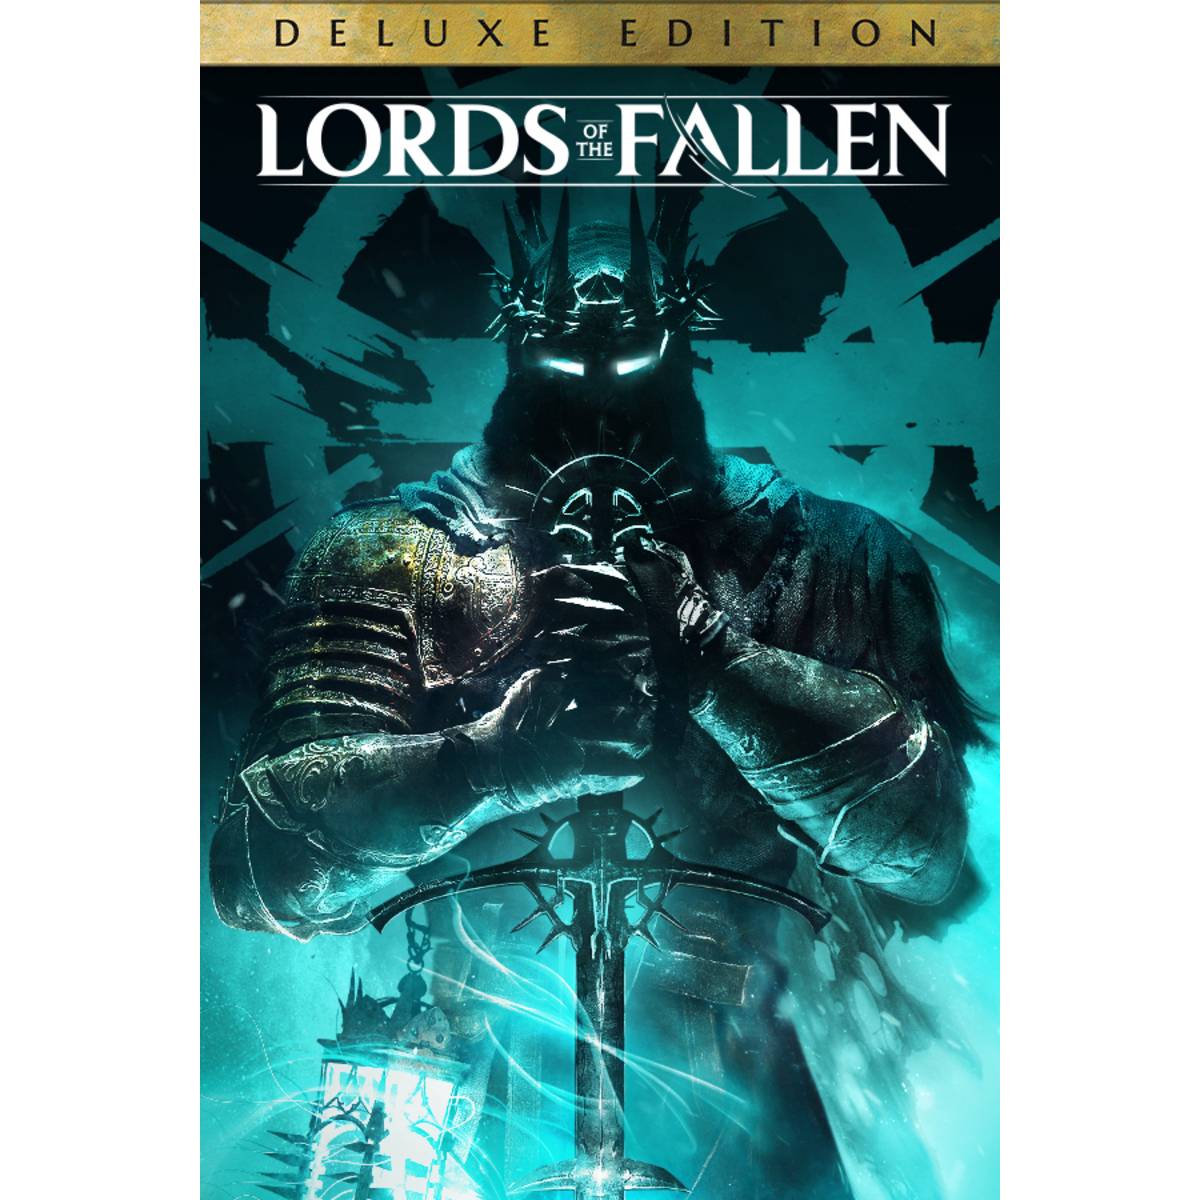 Best Buy: Prima Games Lords of the Fallen (Game Guide) Multi 9781101898123